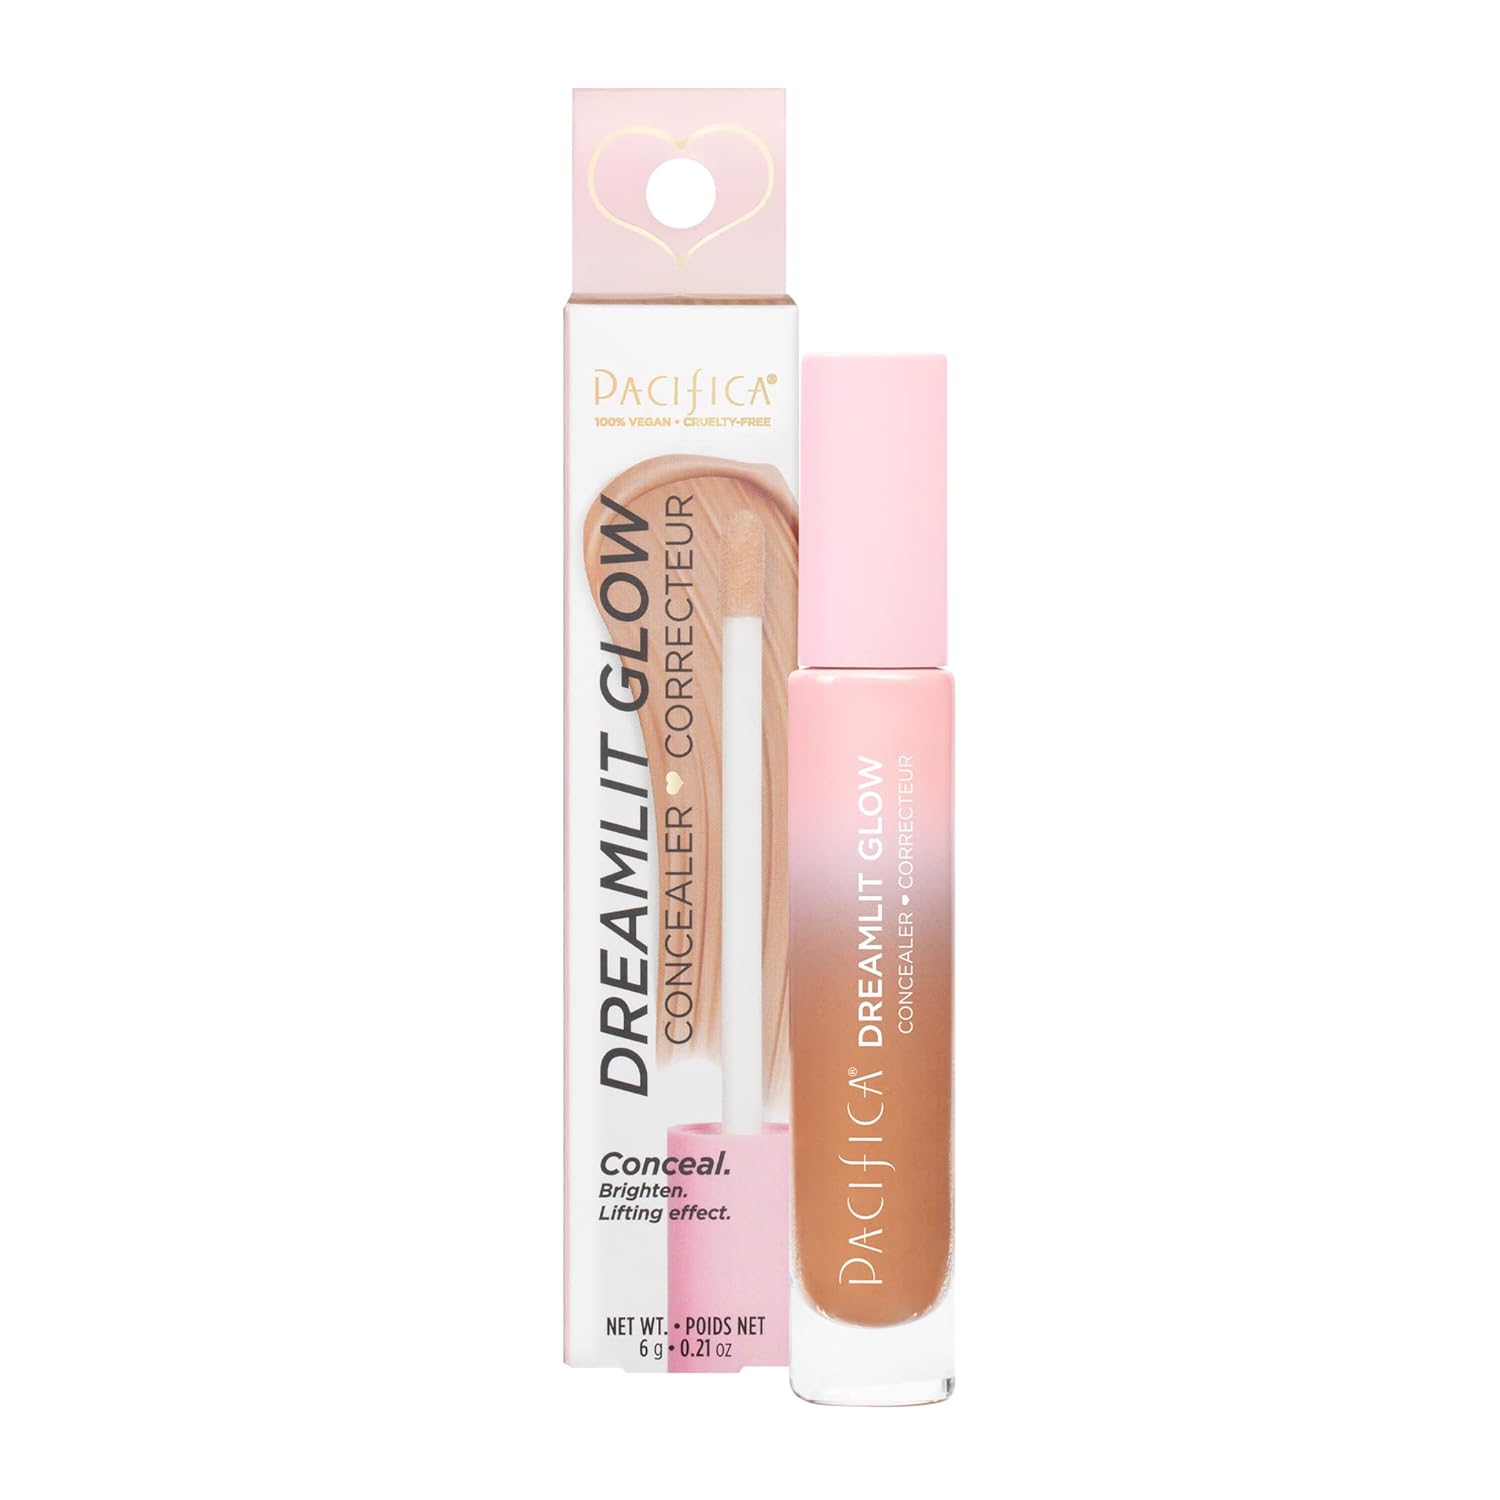 Pacifica Beauty, DreamLit Glow Concealer - Shade 07, Multi-Use Concealer, Conceals, Corrects, Covers, Puffy Eyes and Dark Circles Treatment, Plant-Based Formula, Lightweight, Long Lasting, Vegan, Tan